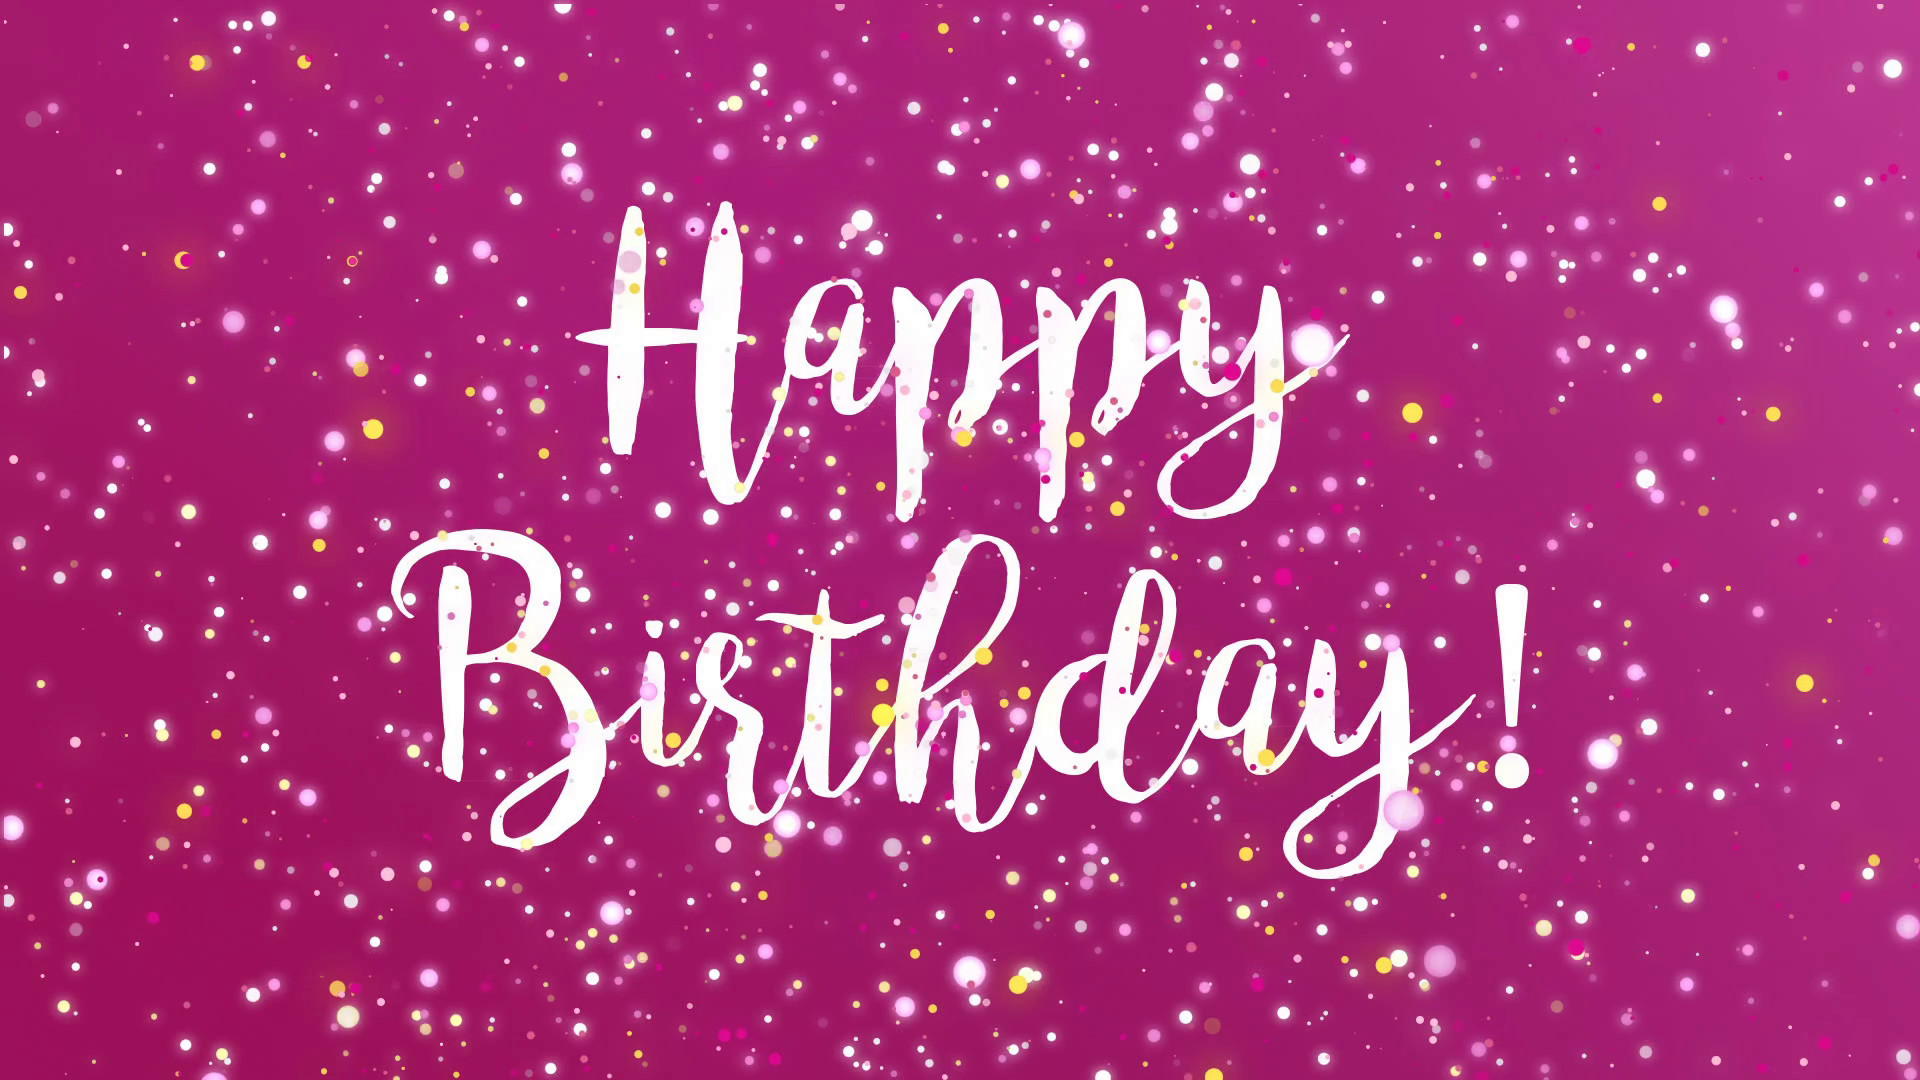 1920x1080 Sparkly Happy Birthday greeting card video animation with handwritten text  and colorful glitter particles flickering on purple background Motion  Background ...